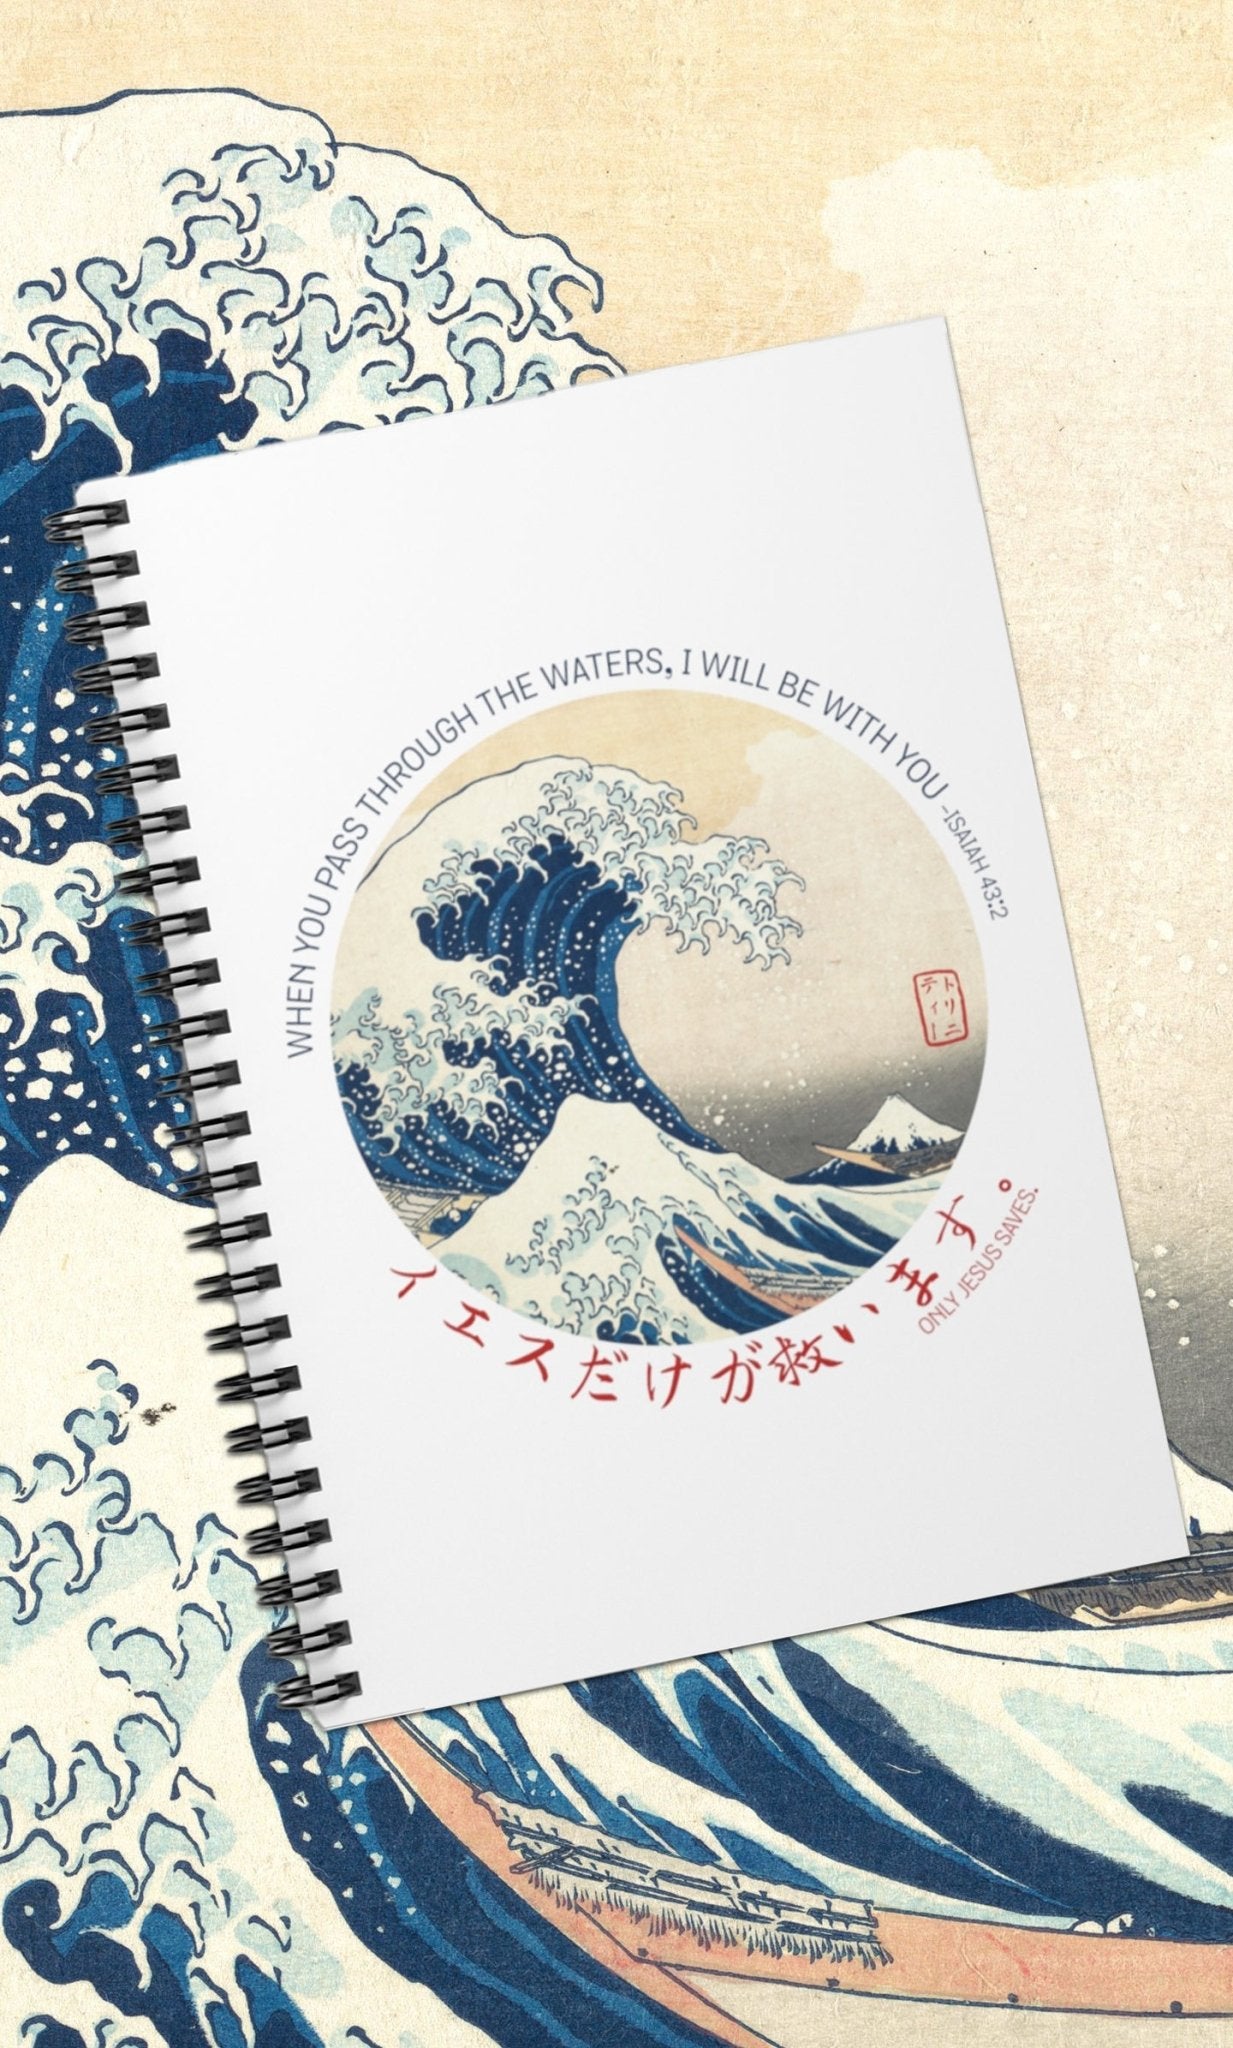 The Great Wave - Notebook - Trini-T Ministries